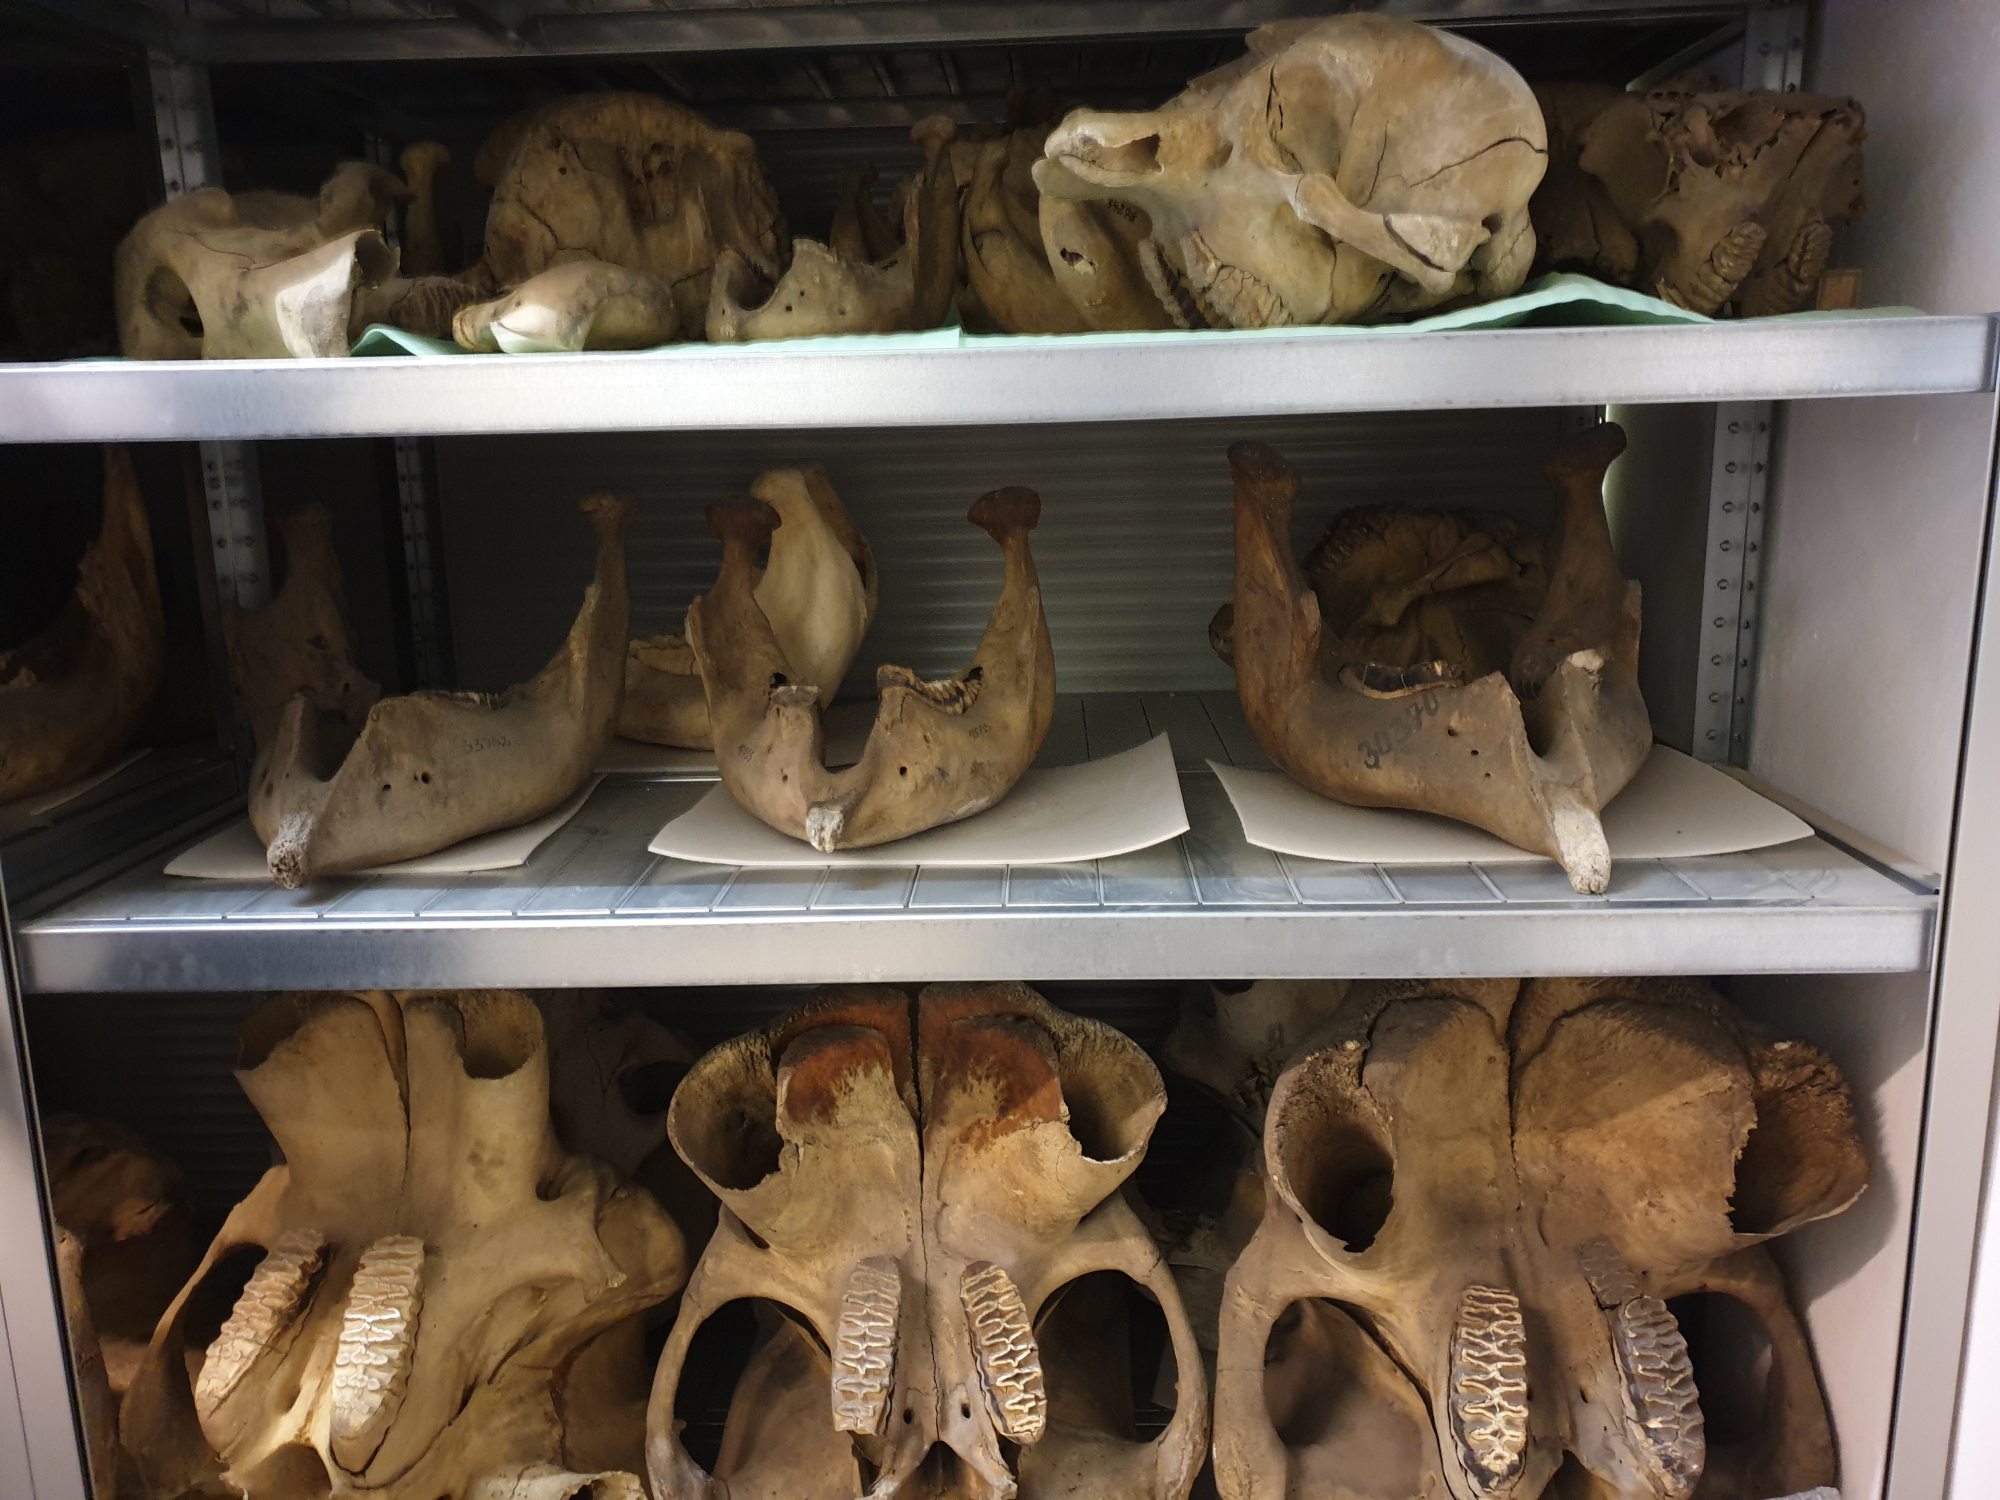 Three shelves on which several elephant skulls are stored